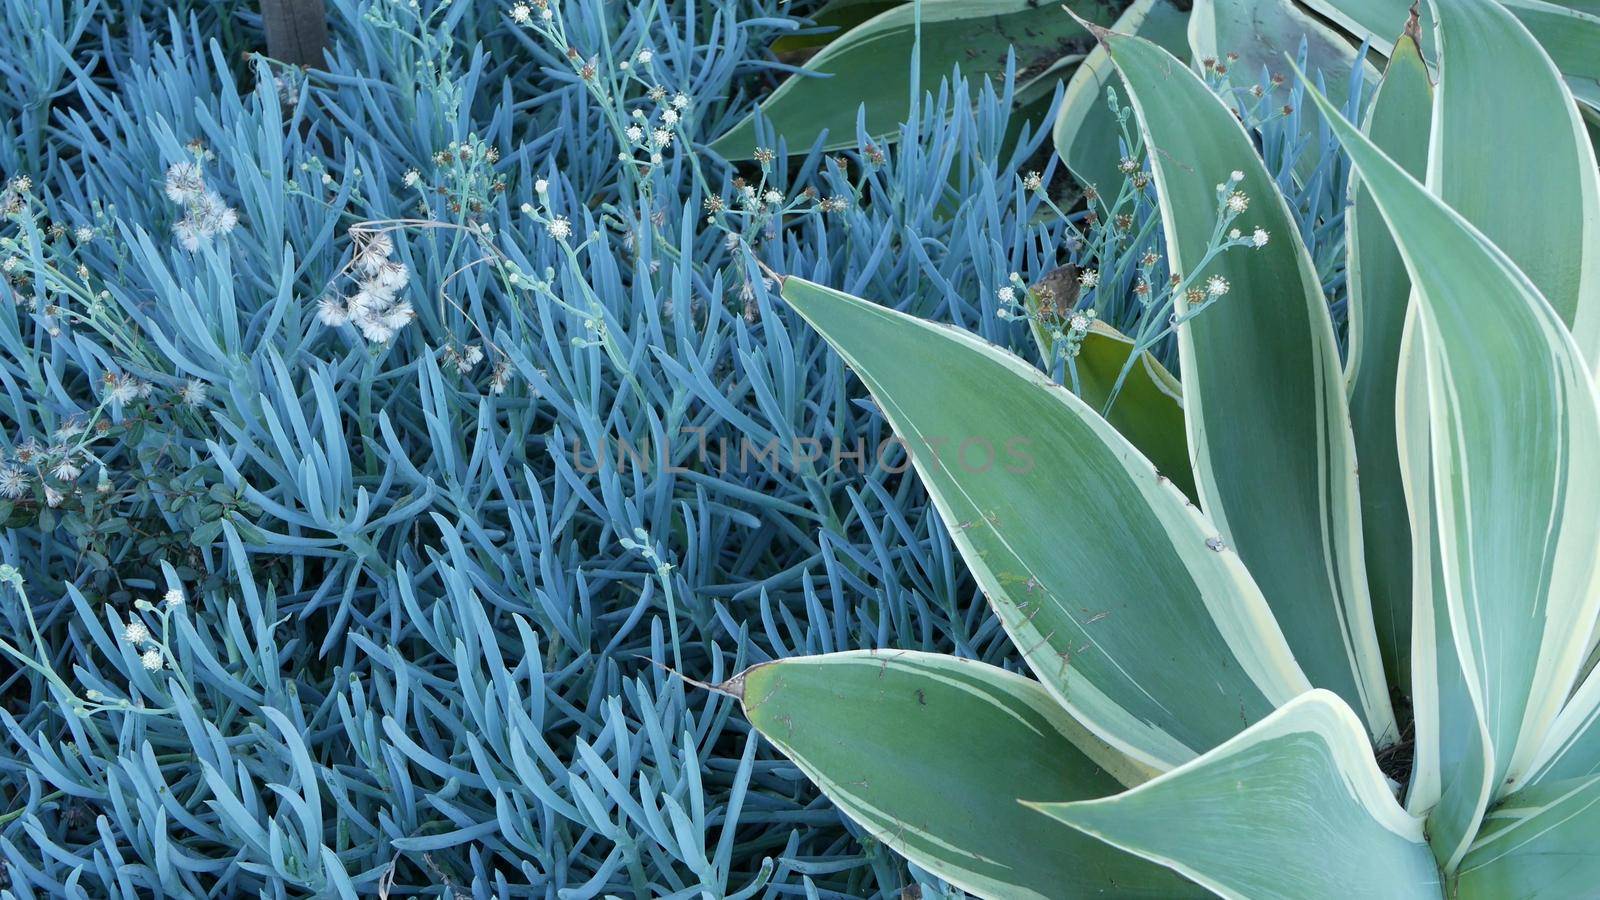 Blue agave leaves, succulent gardening in California, USA. Home garden design, yucca, century plant or aloe. Natural botanical ornamental mexican houseplants, arid desert floriculture. Calm atmosphere